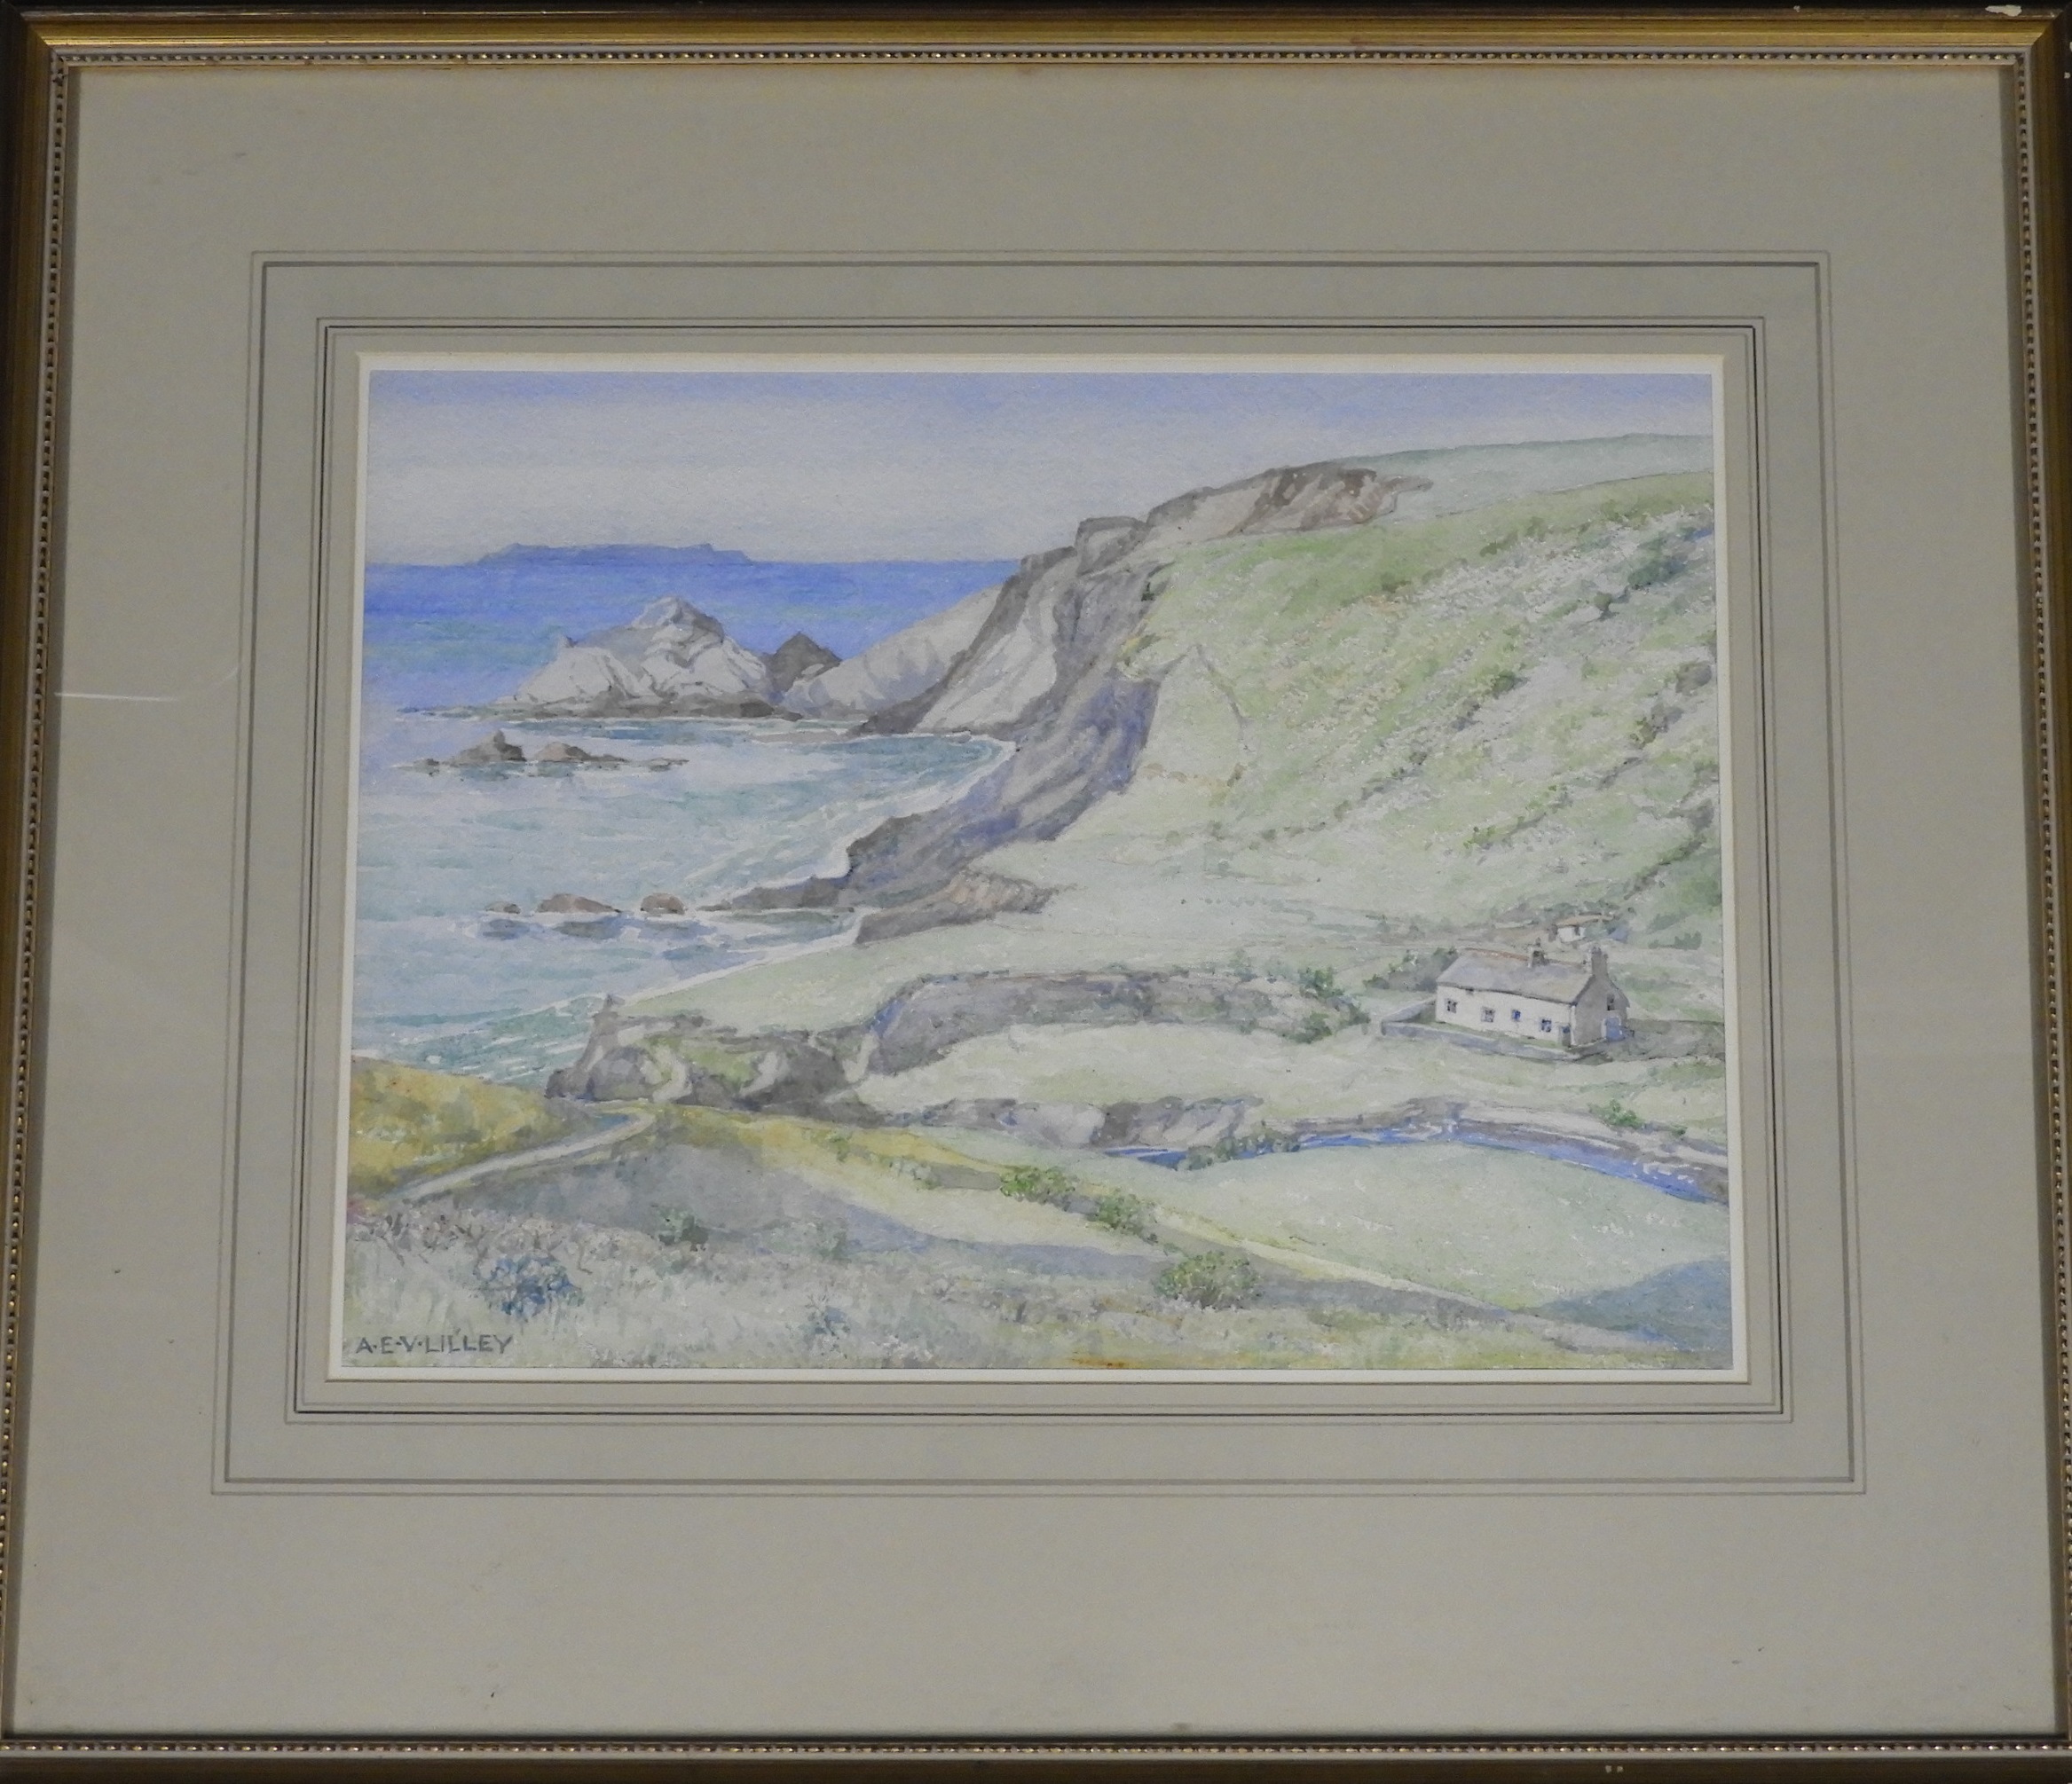 A.E. V. LILLEY WATERCOLOUR NORTHCOTT MOUTH BUDE TOWARDS LUNDY 15" x 11"